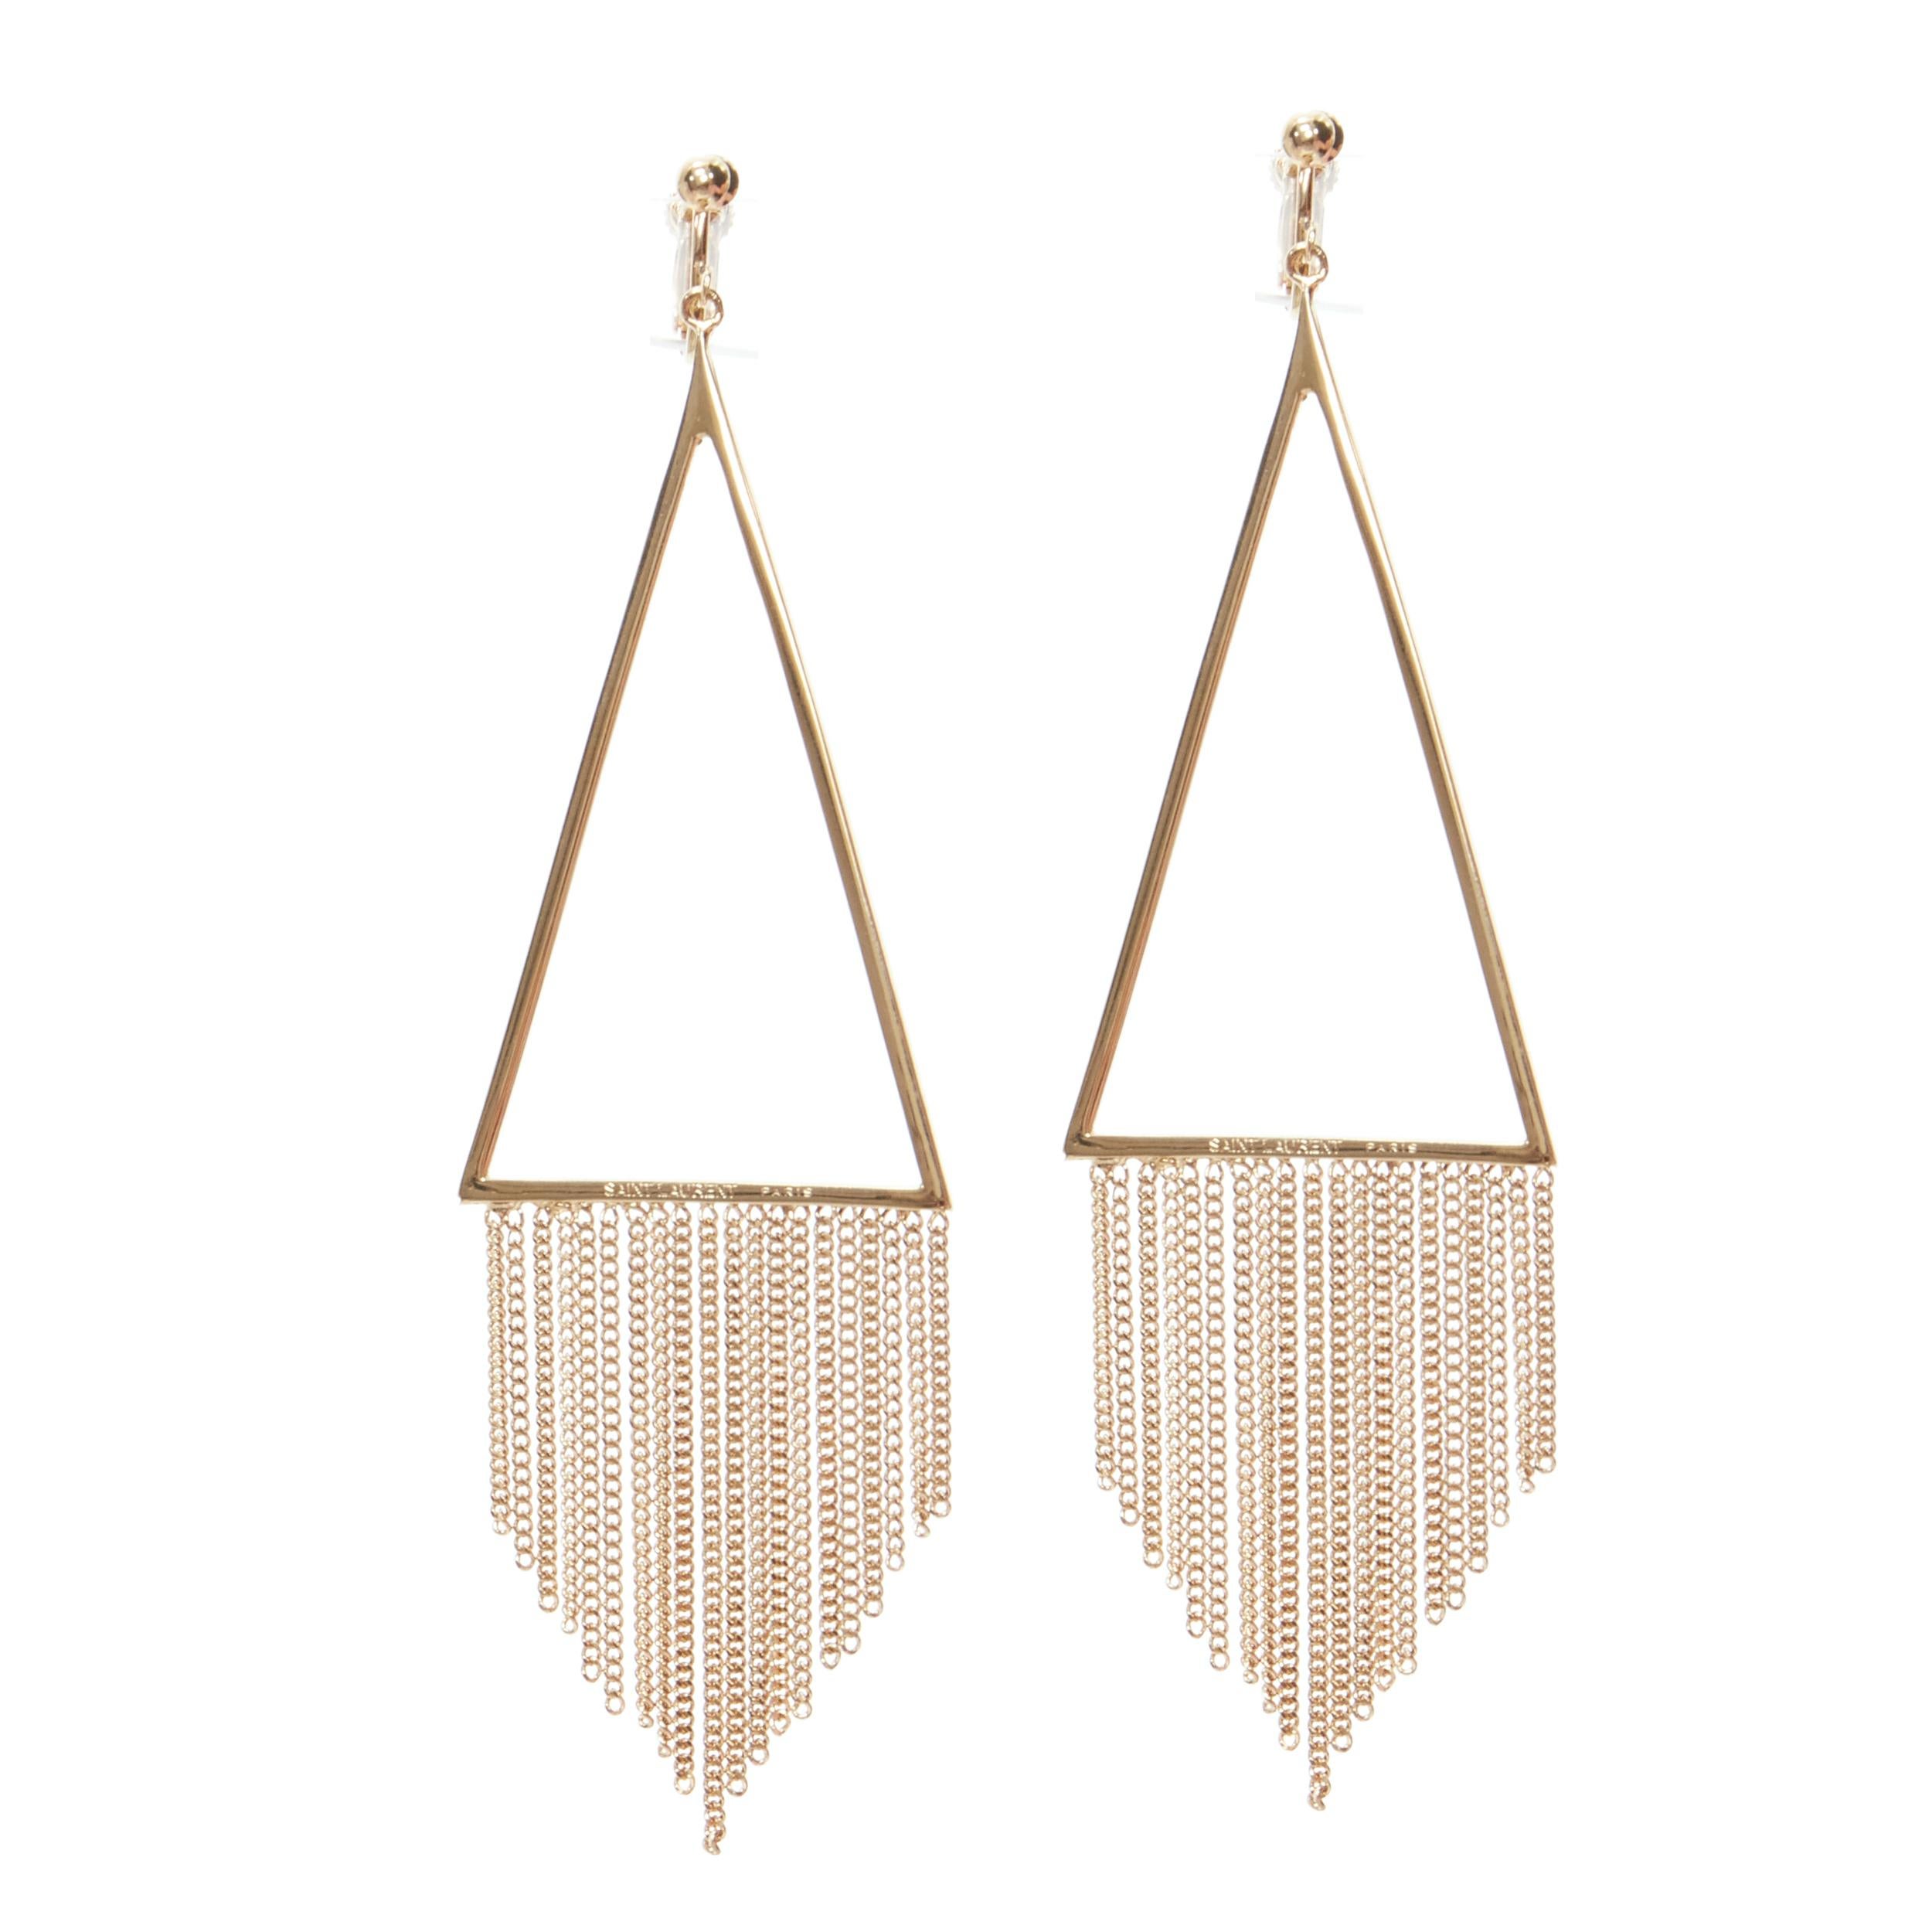 new SAINT LAURENT gold tone metal triangle chain tassel clip on earring 
Reference: TGAS/B01779 
Brand: Saint Laurent 
Material: Metal 
Color: Gold 
Pattern: solid 
Extra Detail: Please note there is no YSL branding stamped on this earring.